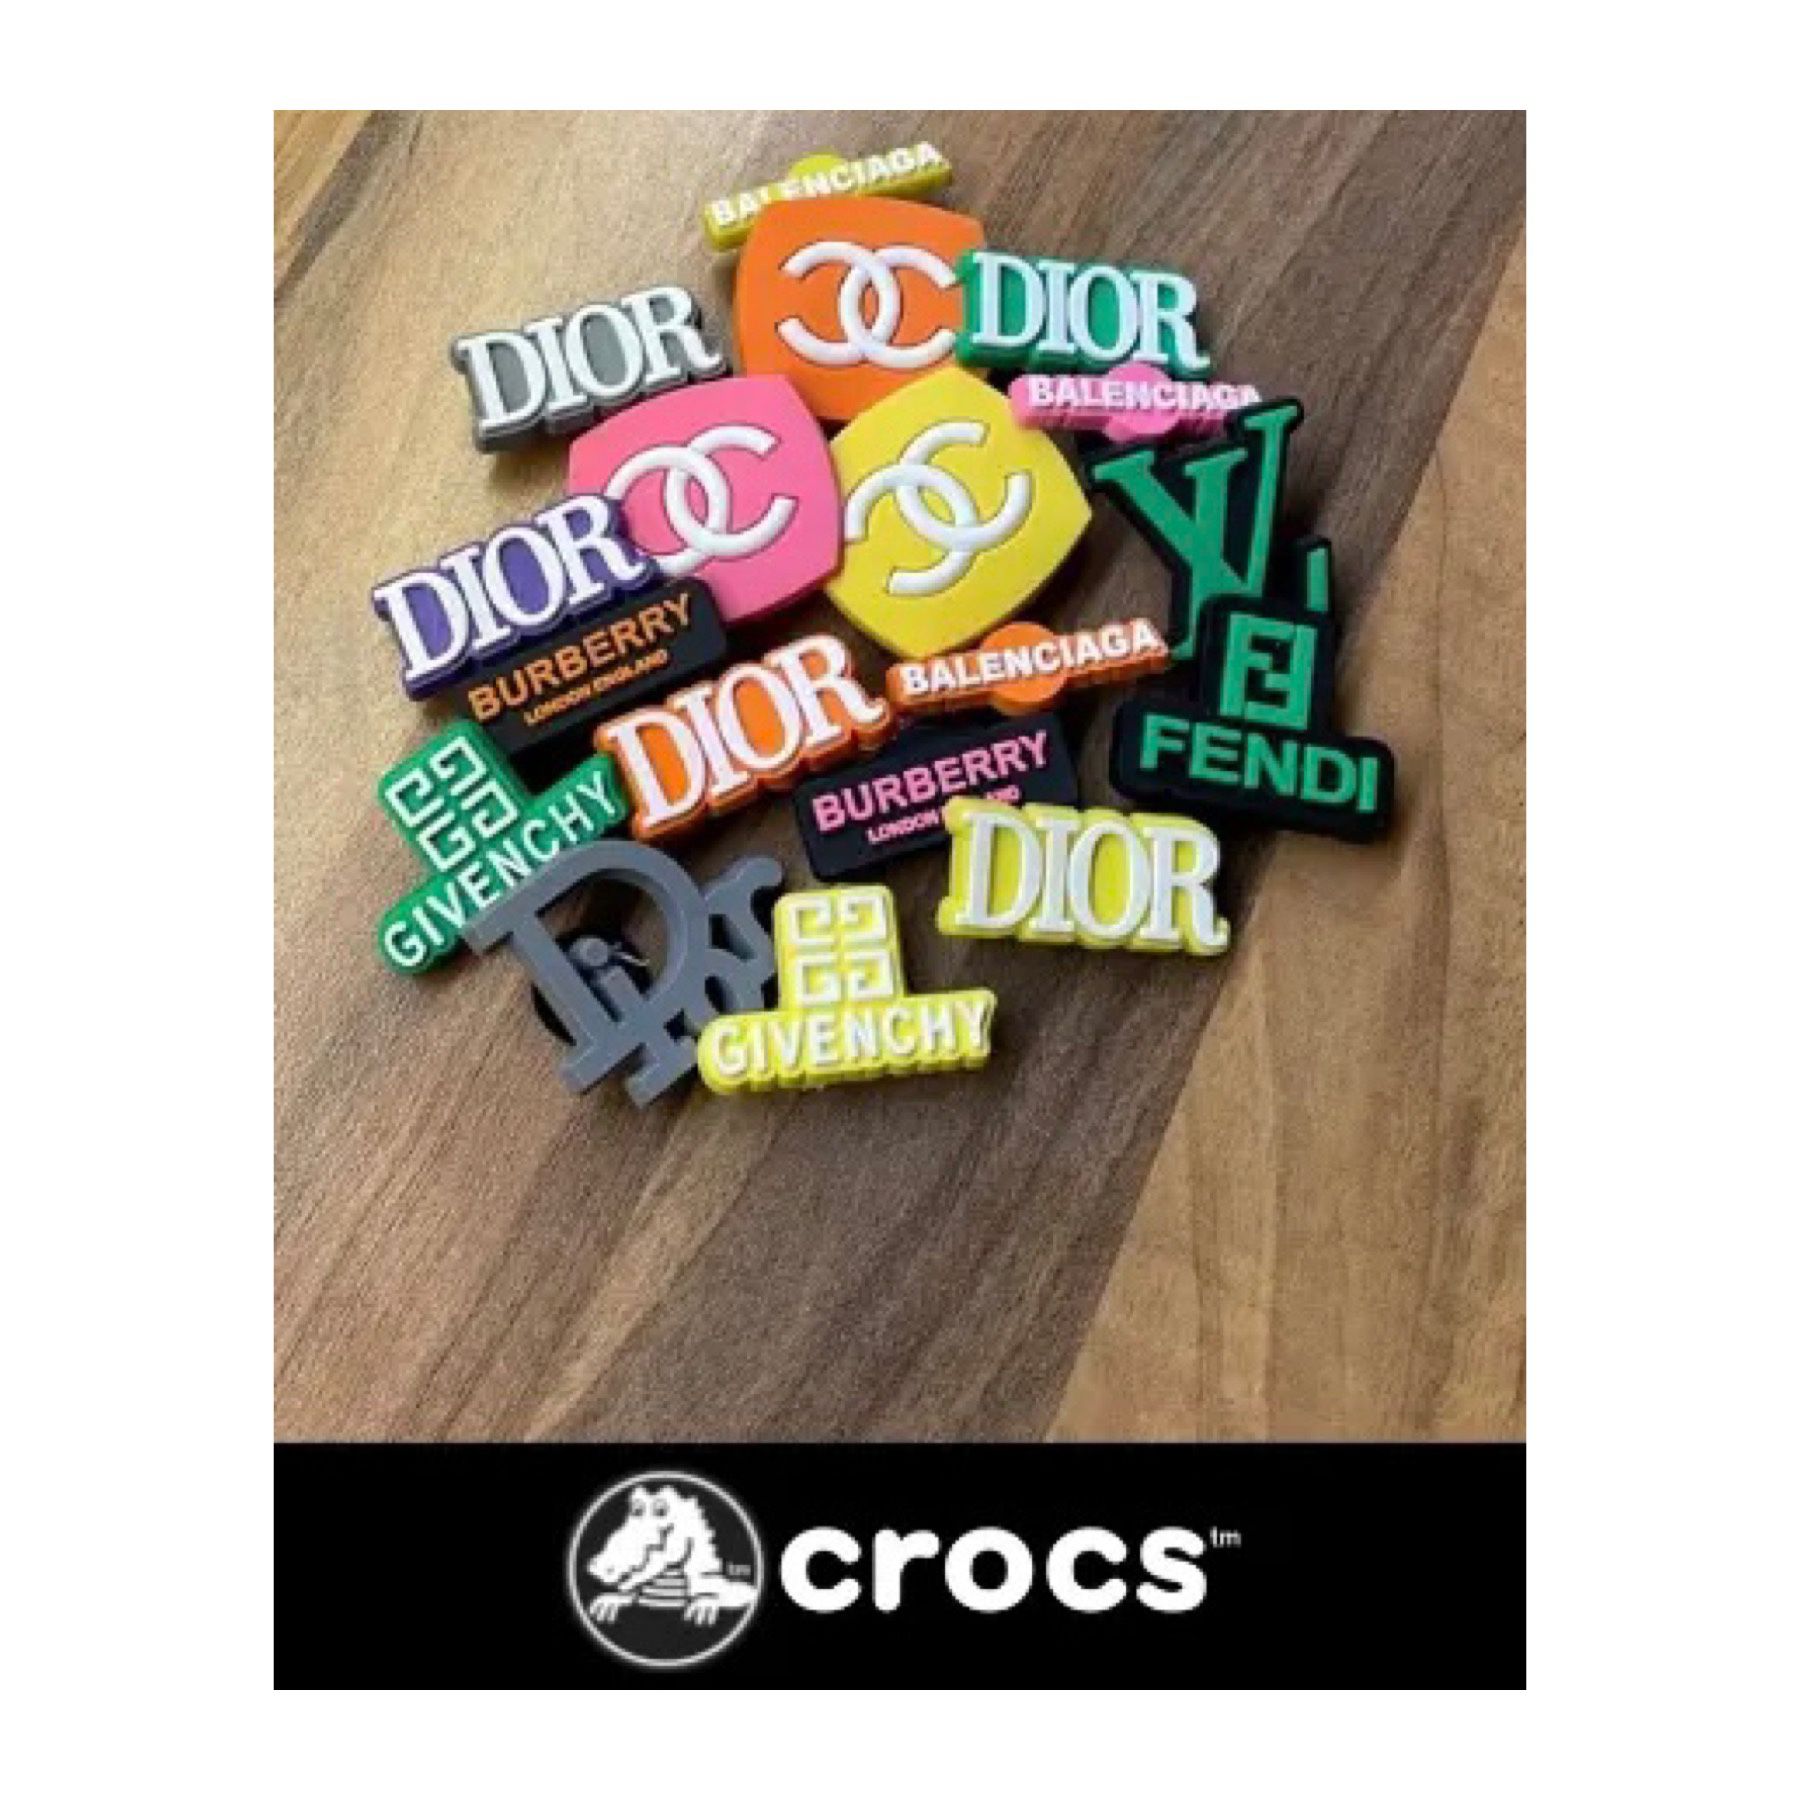 8 Piece Designer Croc Charms Nike/GG/CC/Dior And More for Sale in